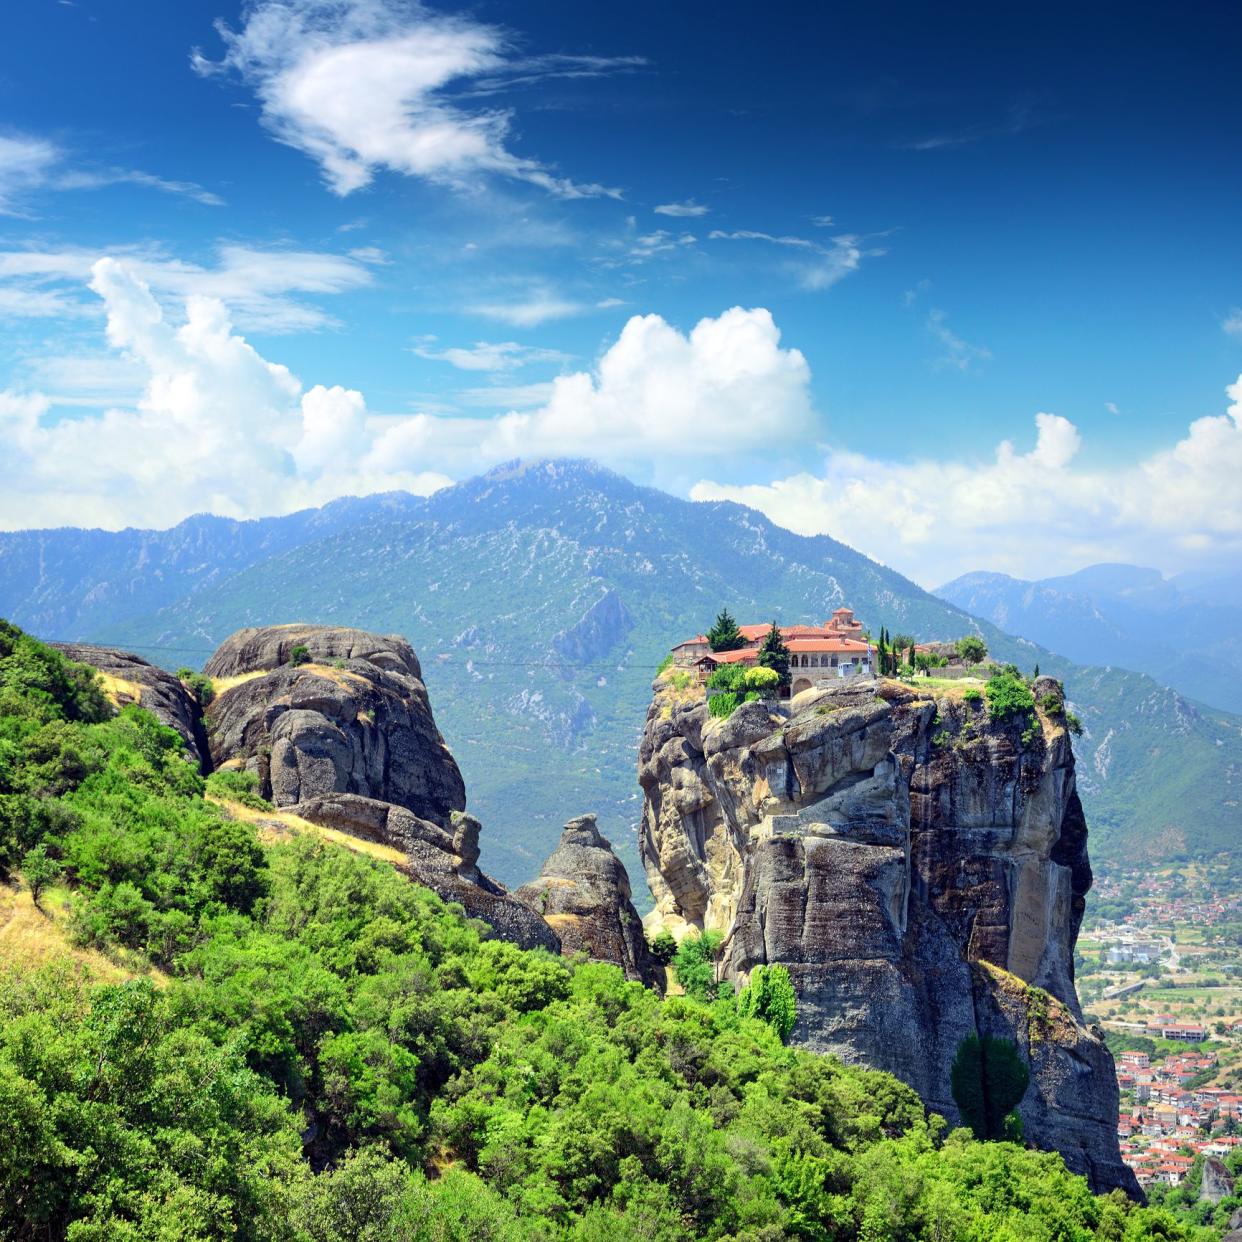 Monastery of the Holy Trinity (1475-76), Meteora, Greece. The monastery was featured in the 1981 James Bond film,